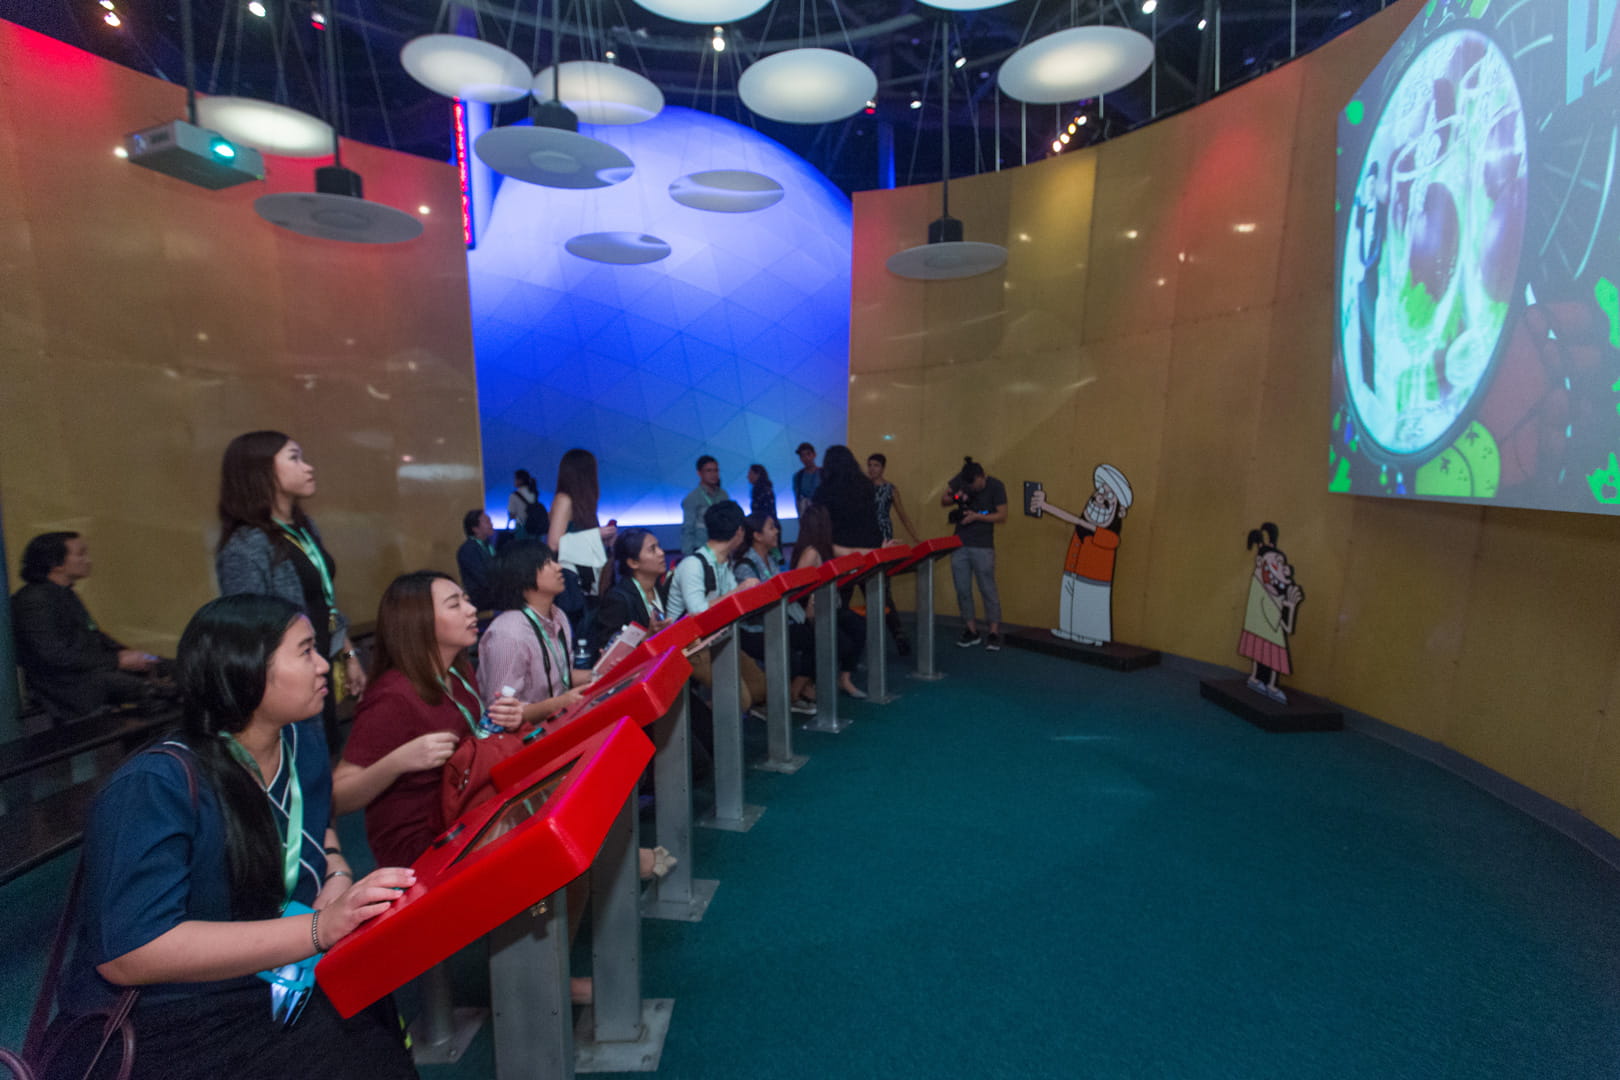 Participants learning about the Singapore story through interactive exhibits which display the country’s history and future plans at the Singapore Discovery Centre